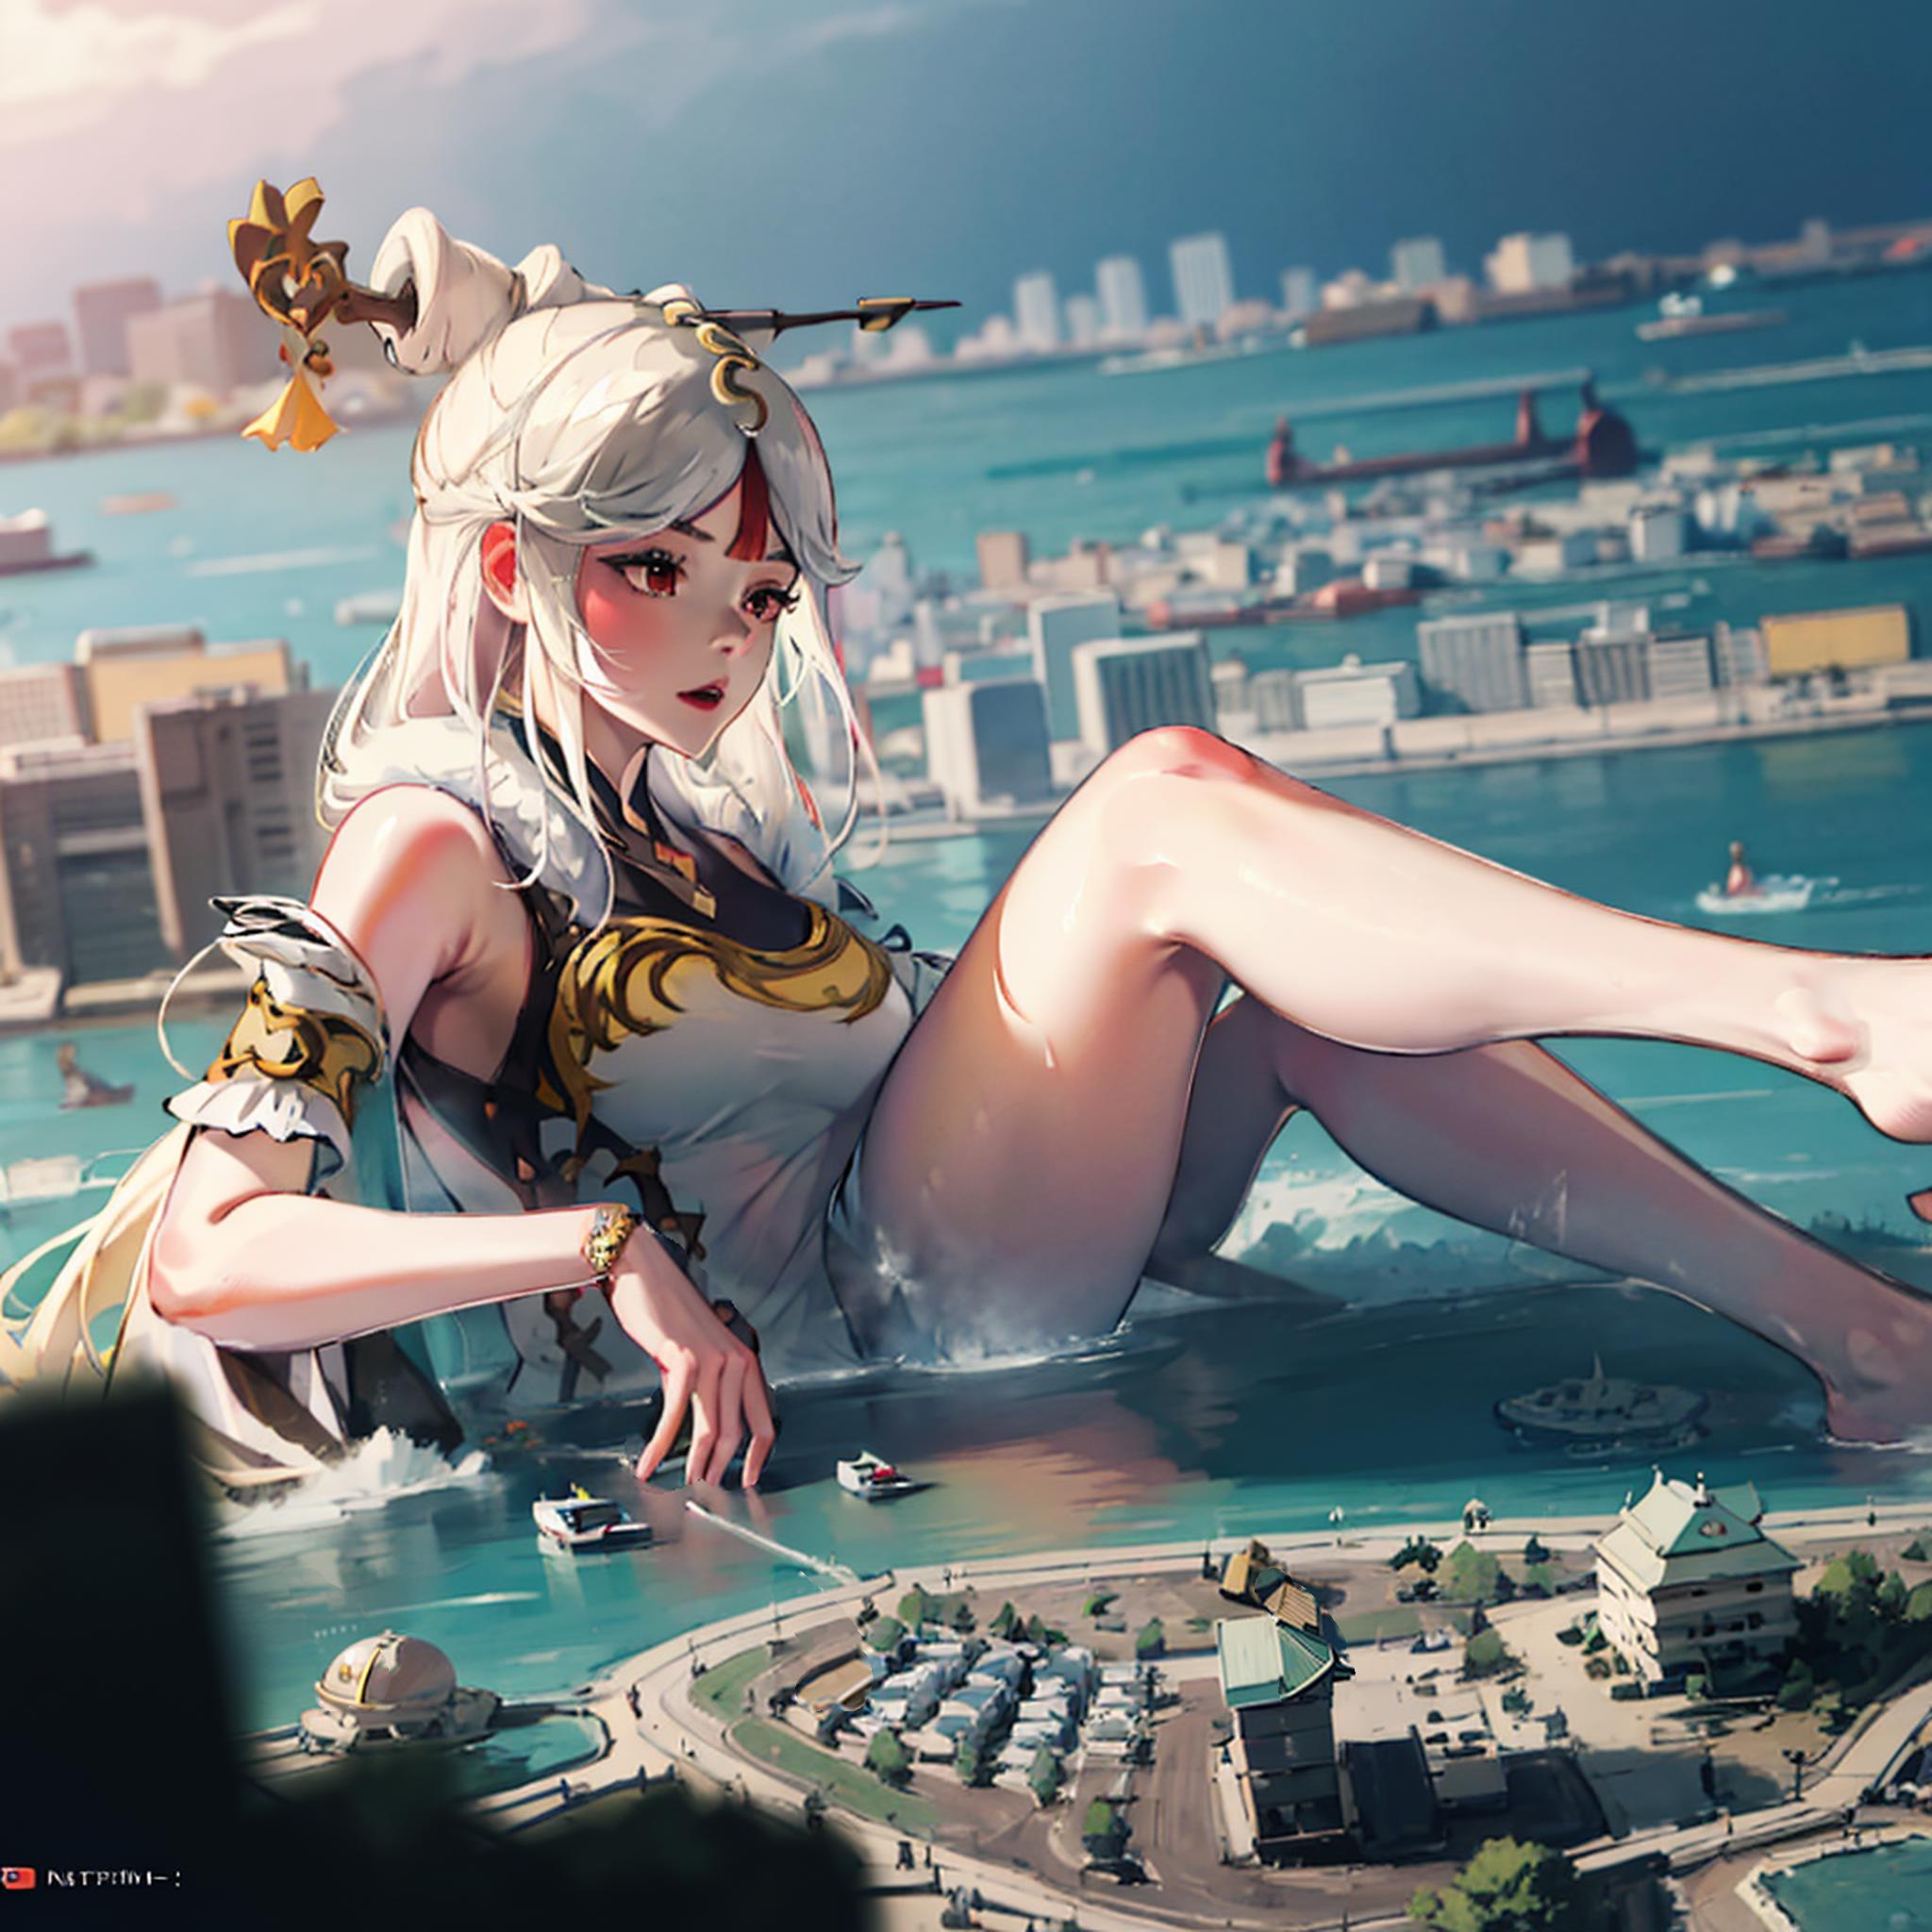 Giantess | Concept image by fosst